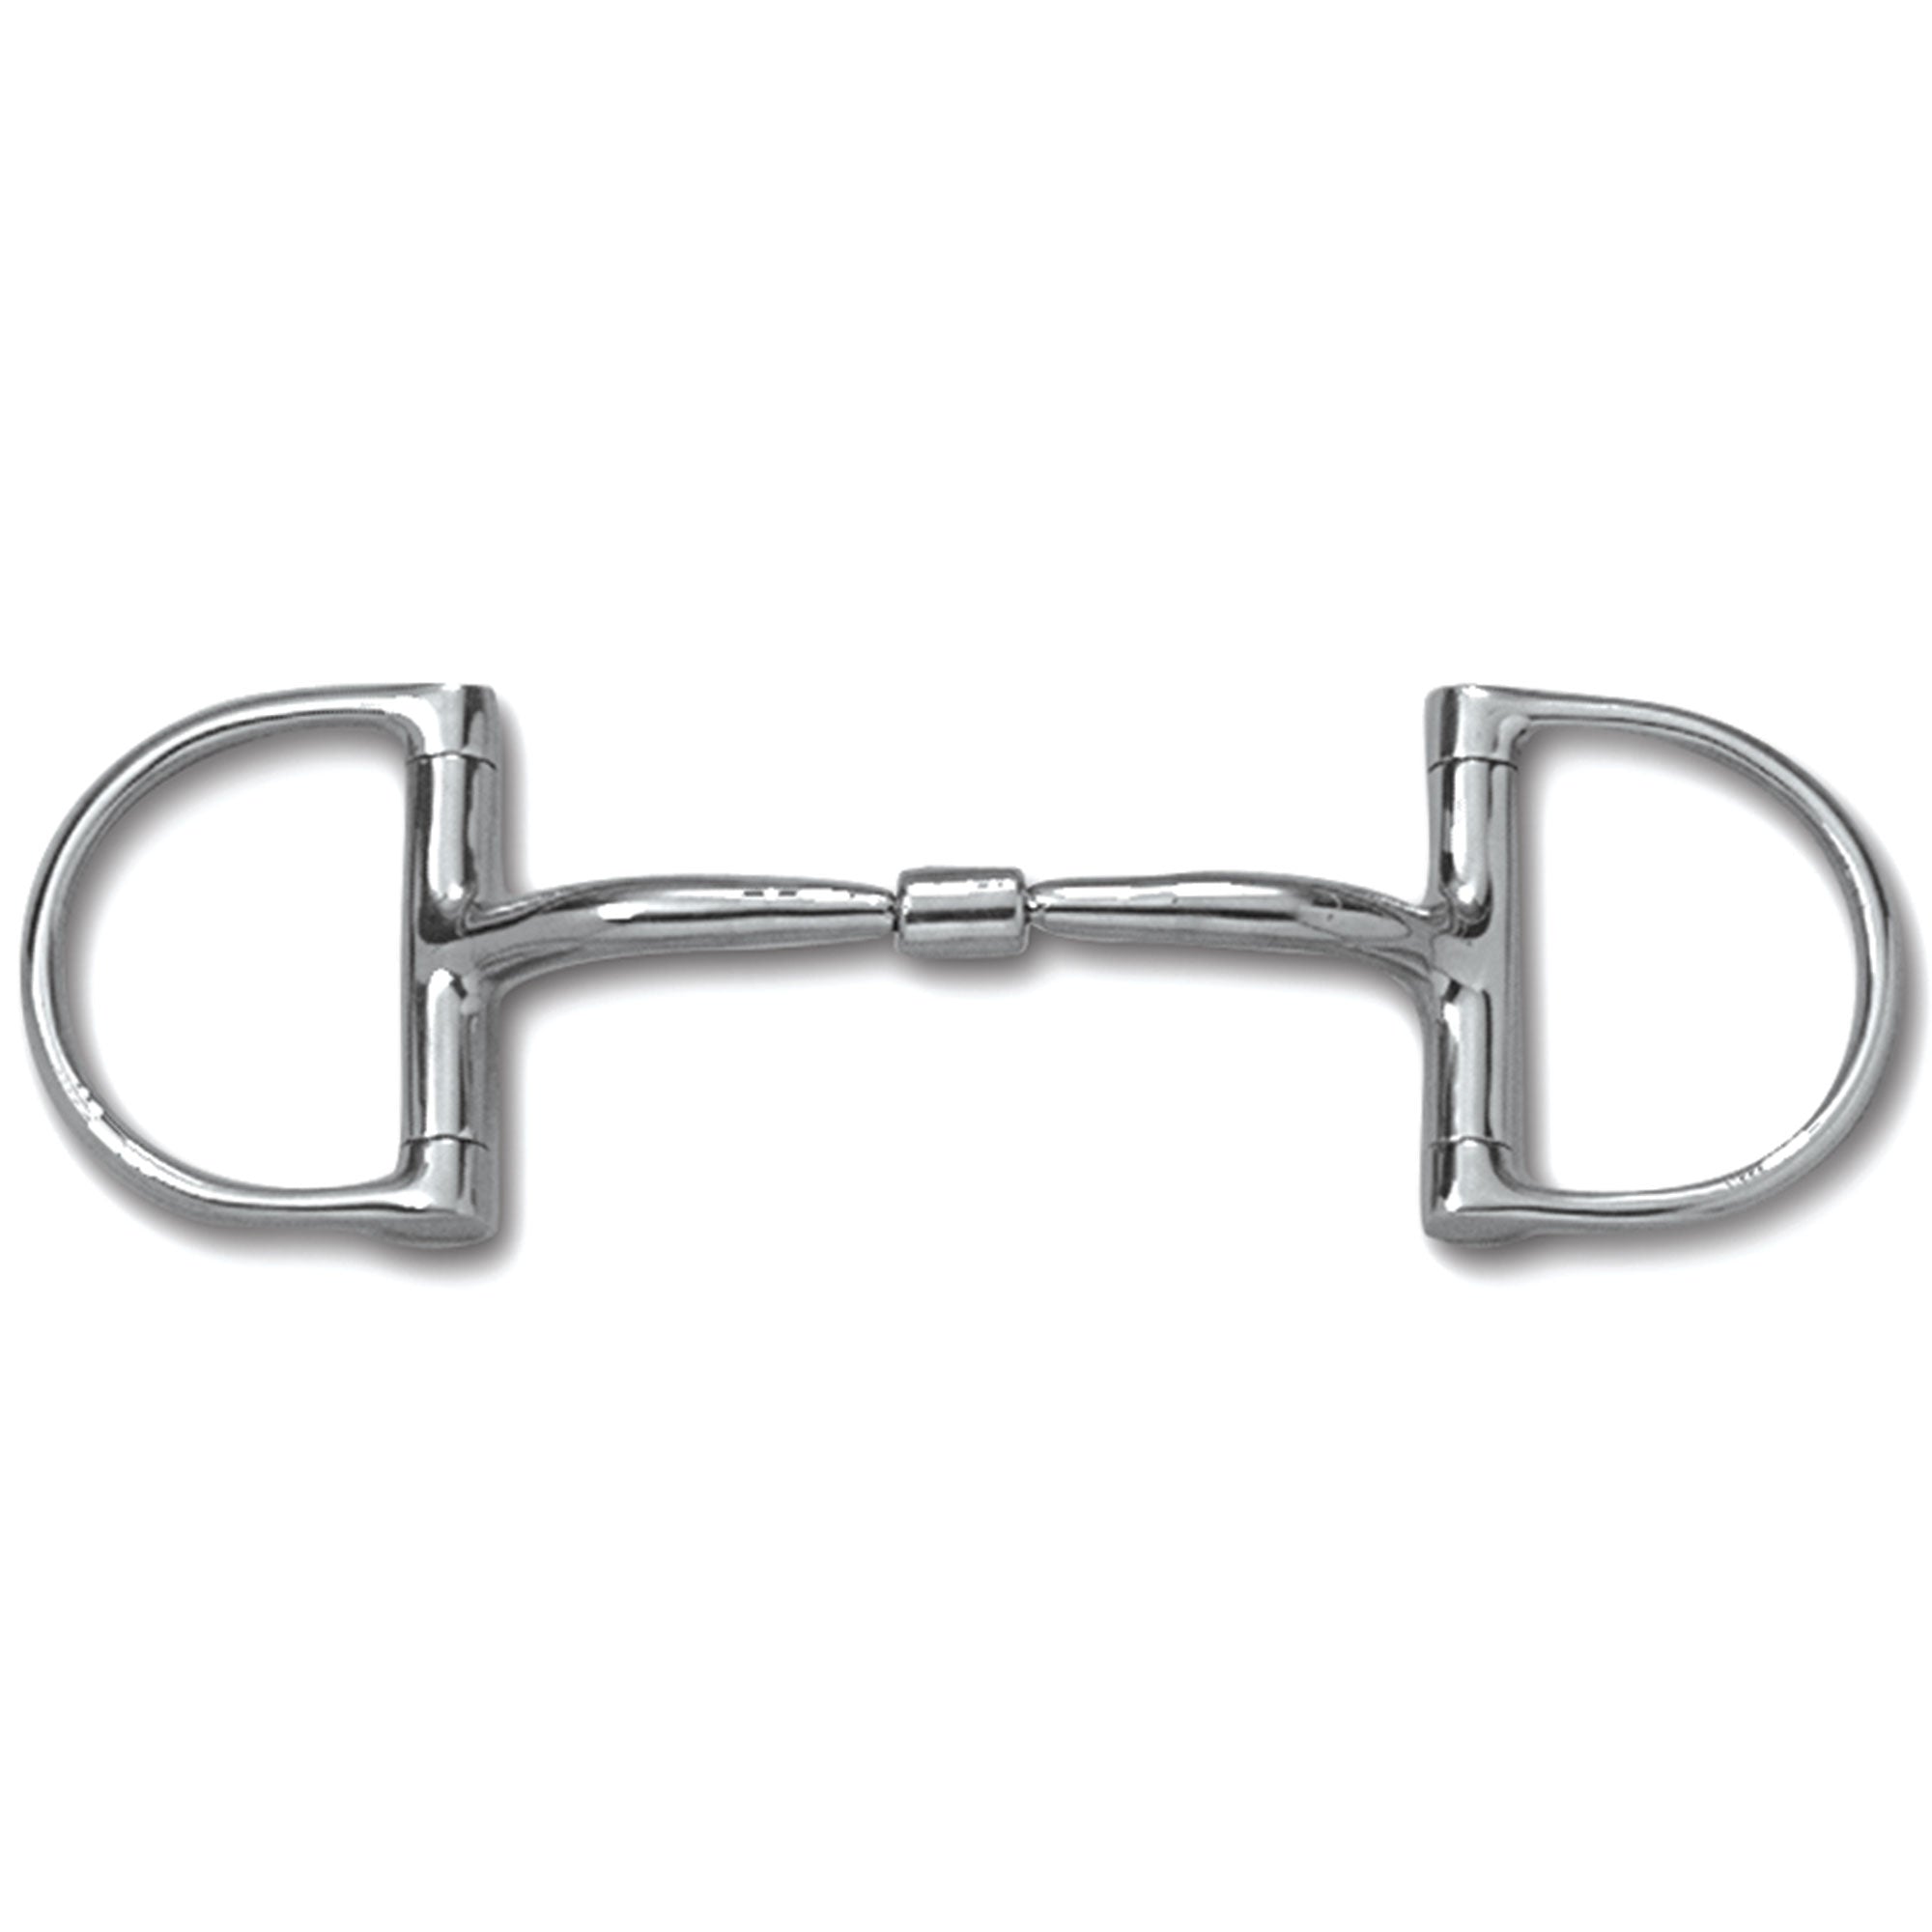 Myler Pony D Ring Without Hooks Comfort Snaffle with Narrow Barrel